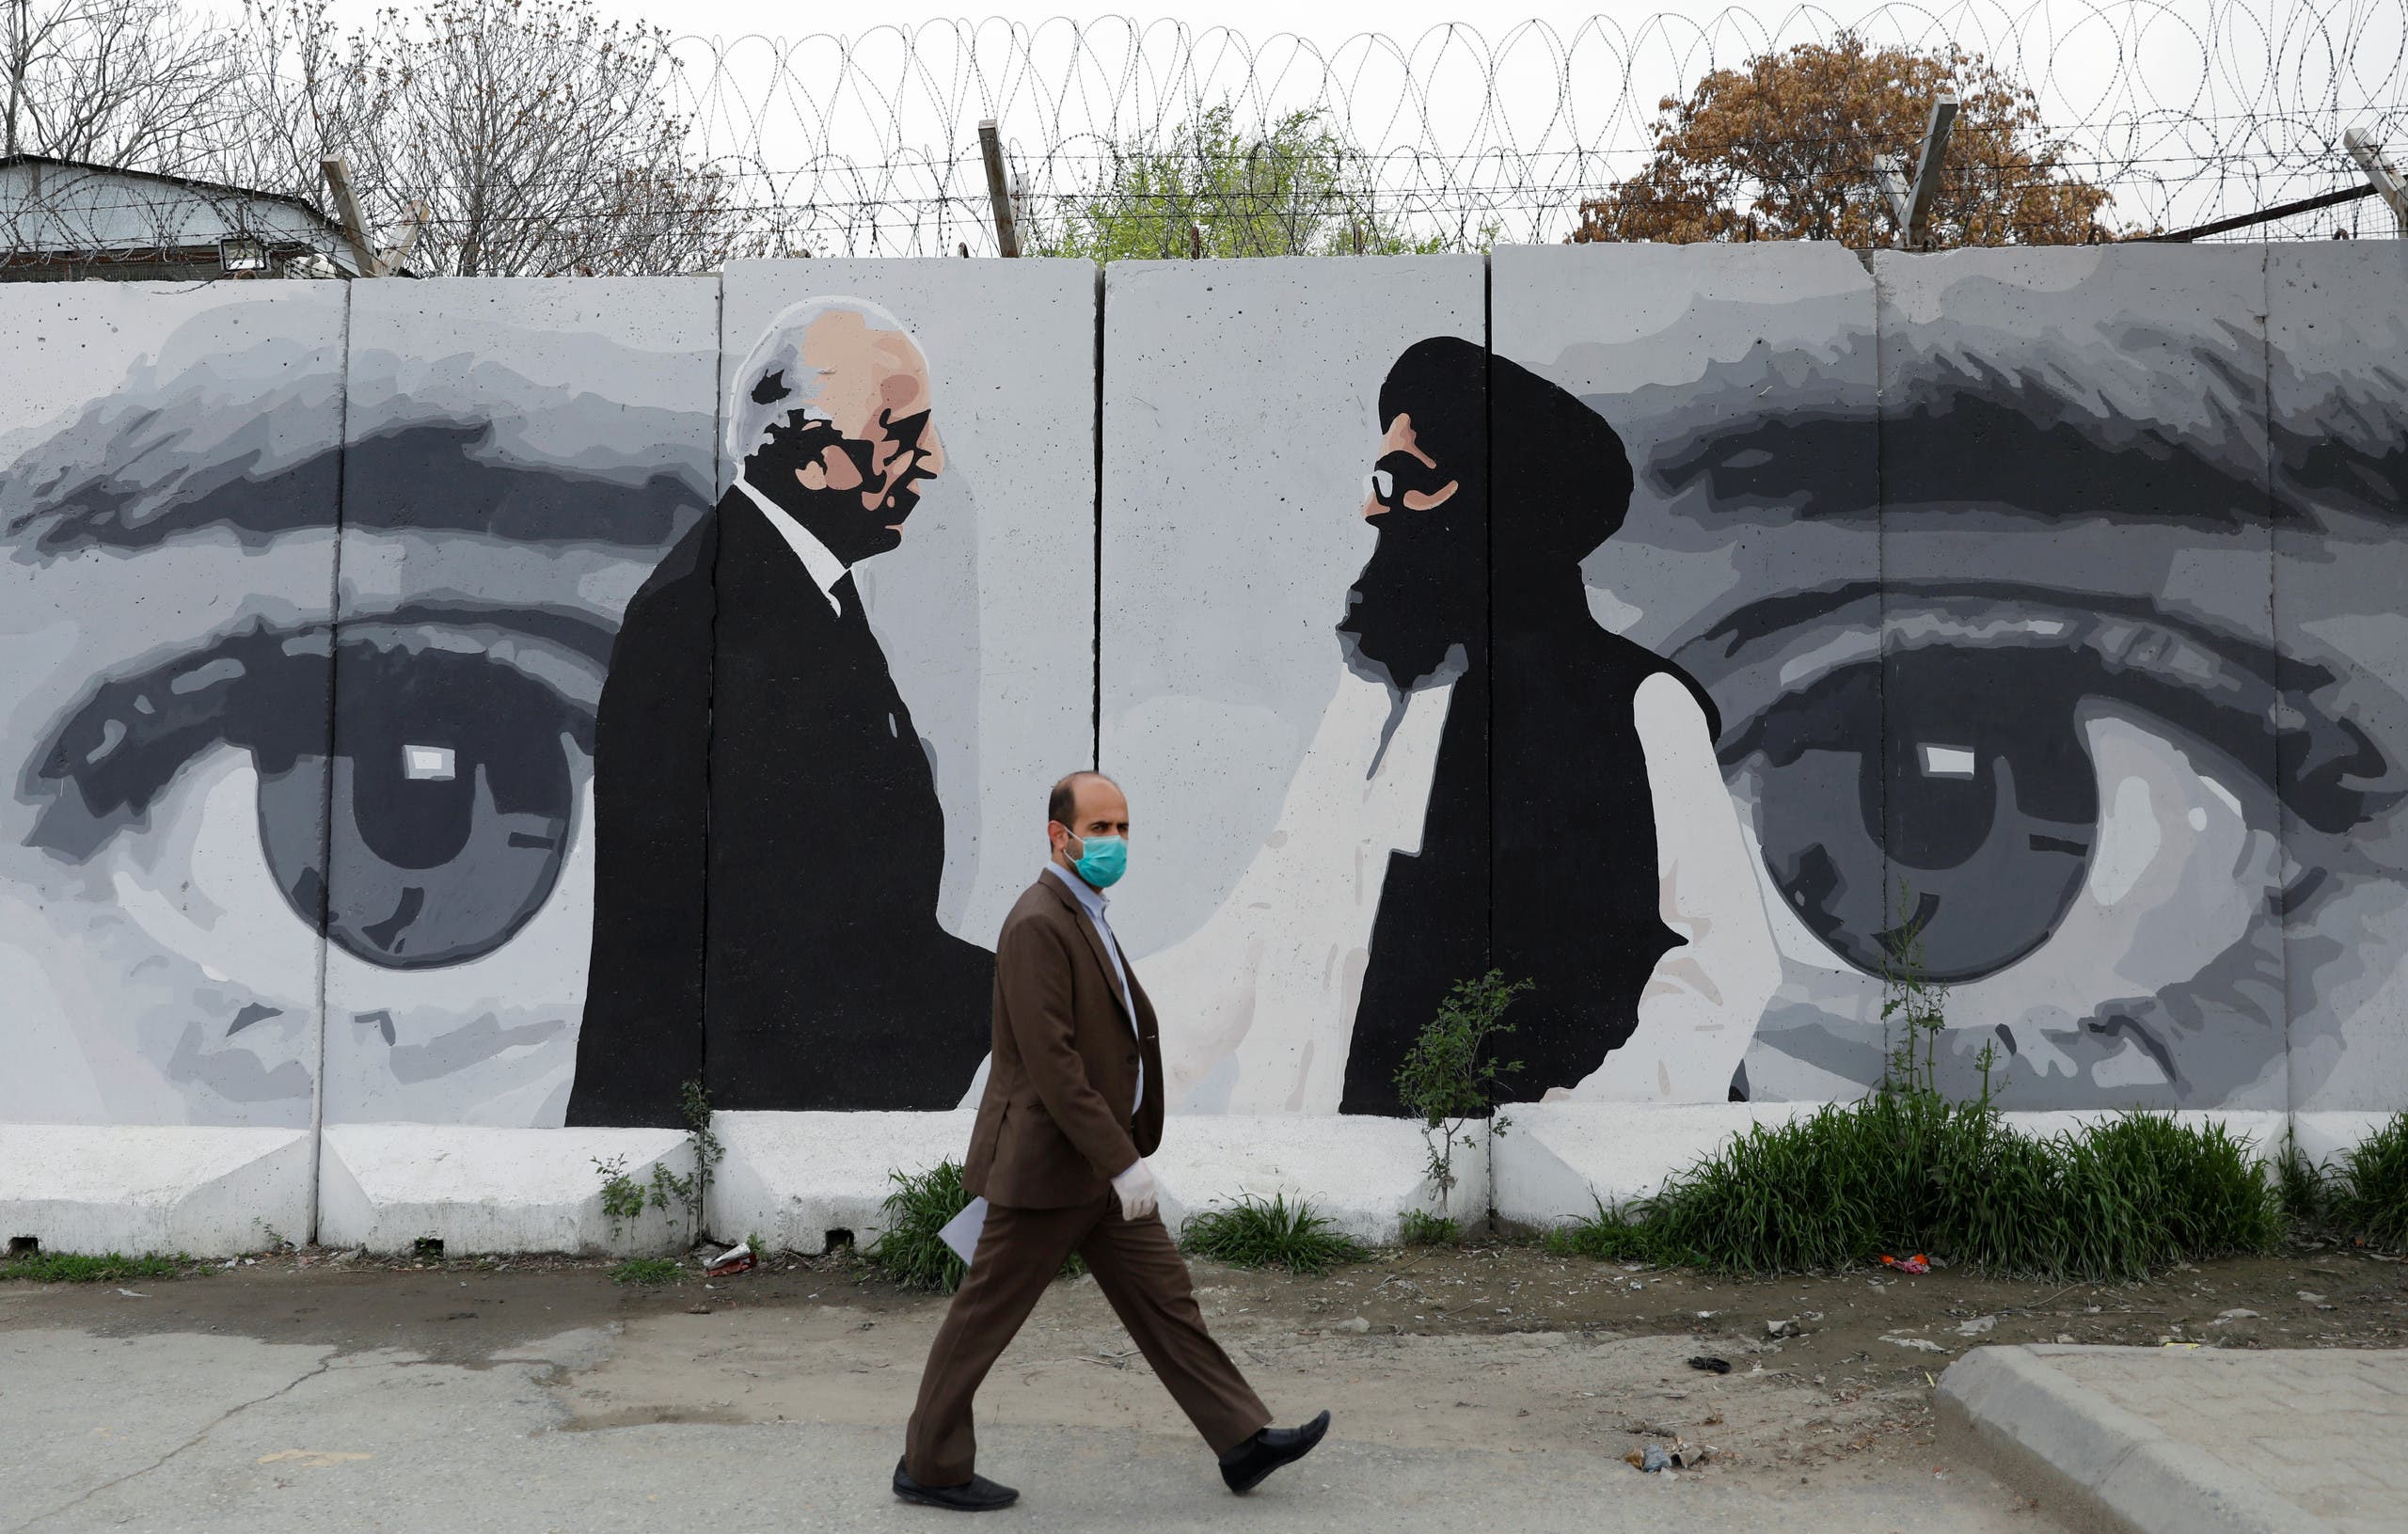 An Afghan man wearing a protective face mask walks past a wall painted with photo of Zalmay Khalilzad, US envoy for peace in Afghanistan, and Mullah Abdul Ghani Baradar, the leader of the Taliban delegation, in Kabul, Afghanistan on April 13, 2020. (Reuters)